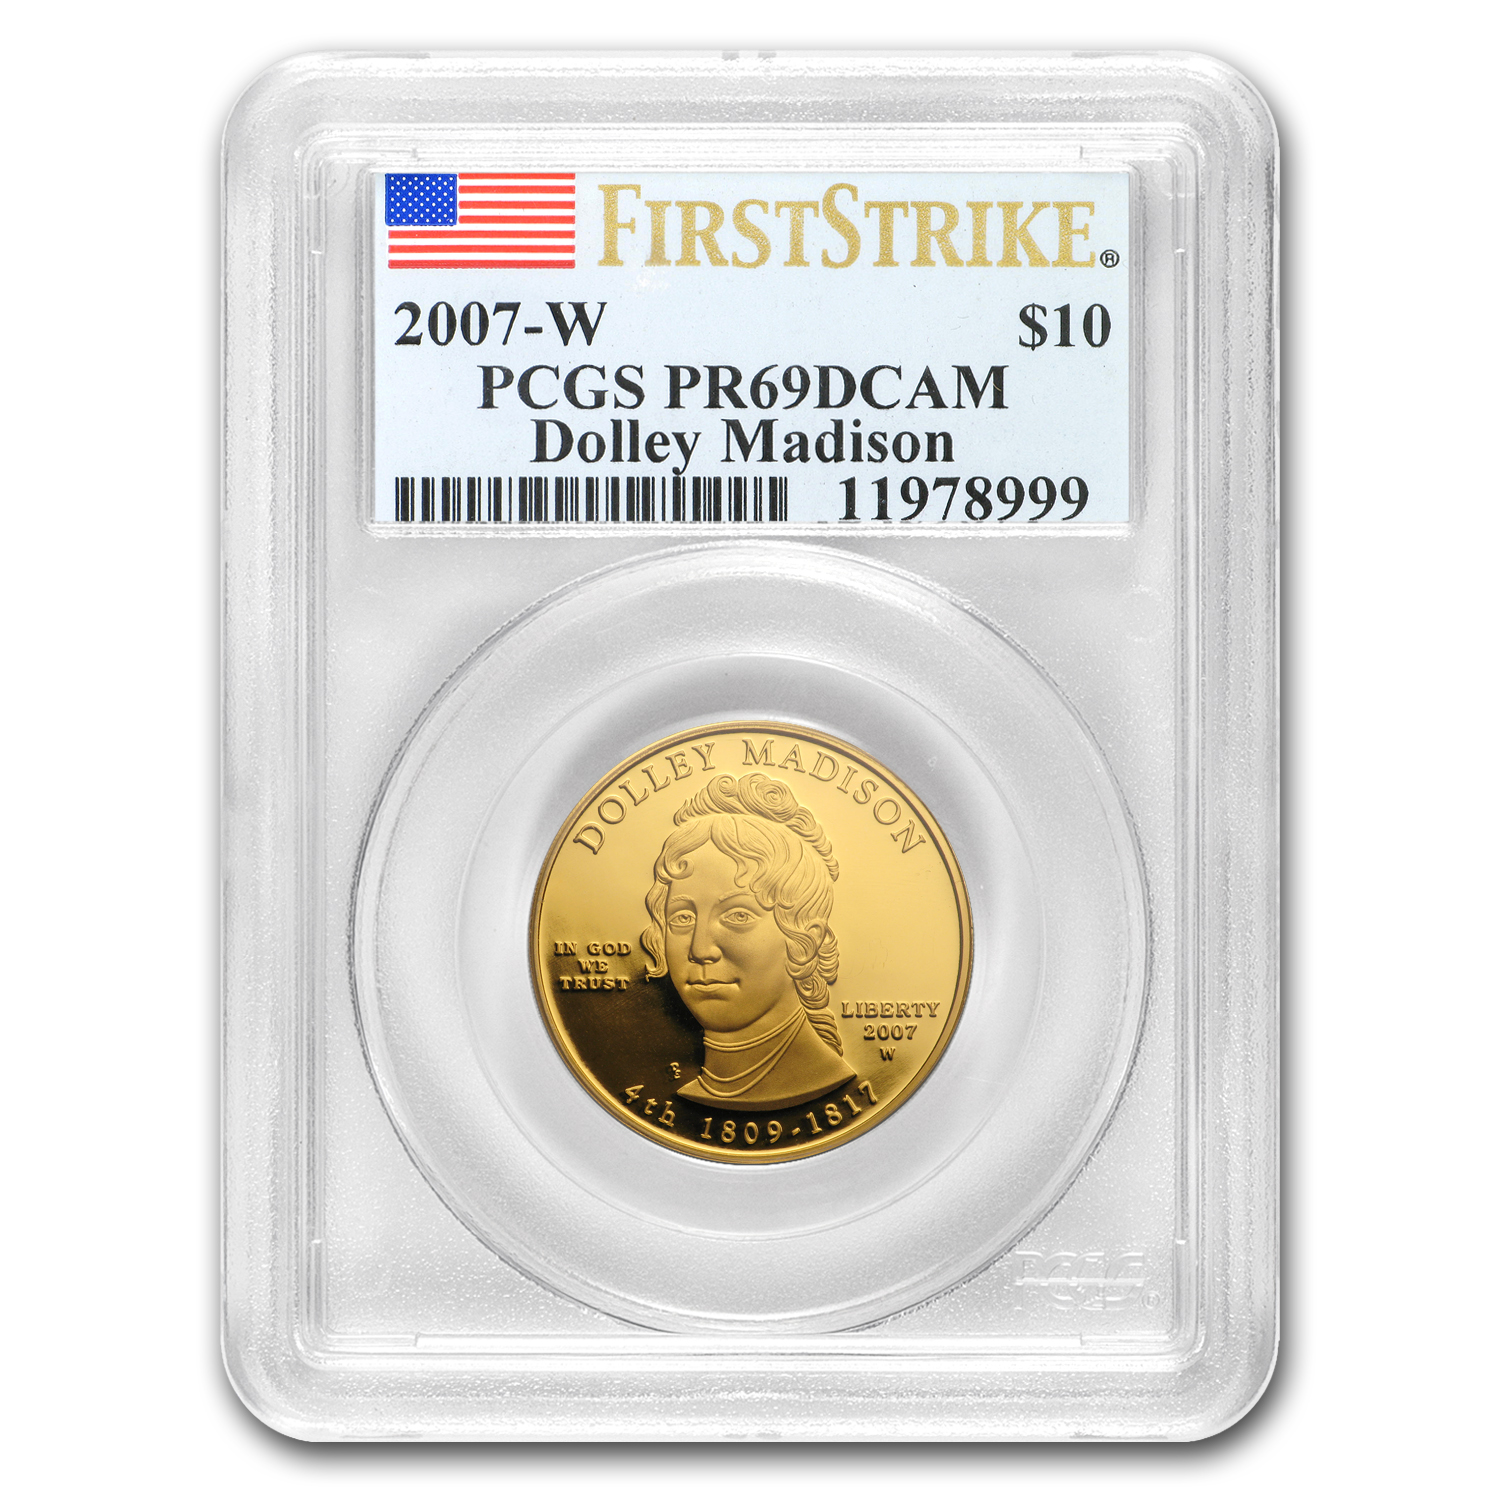 Buy 2007-W 1/2 oz Proof Gold Dolley Madison PR-69 PCGS (FS) - Click Image to Close